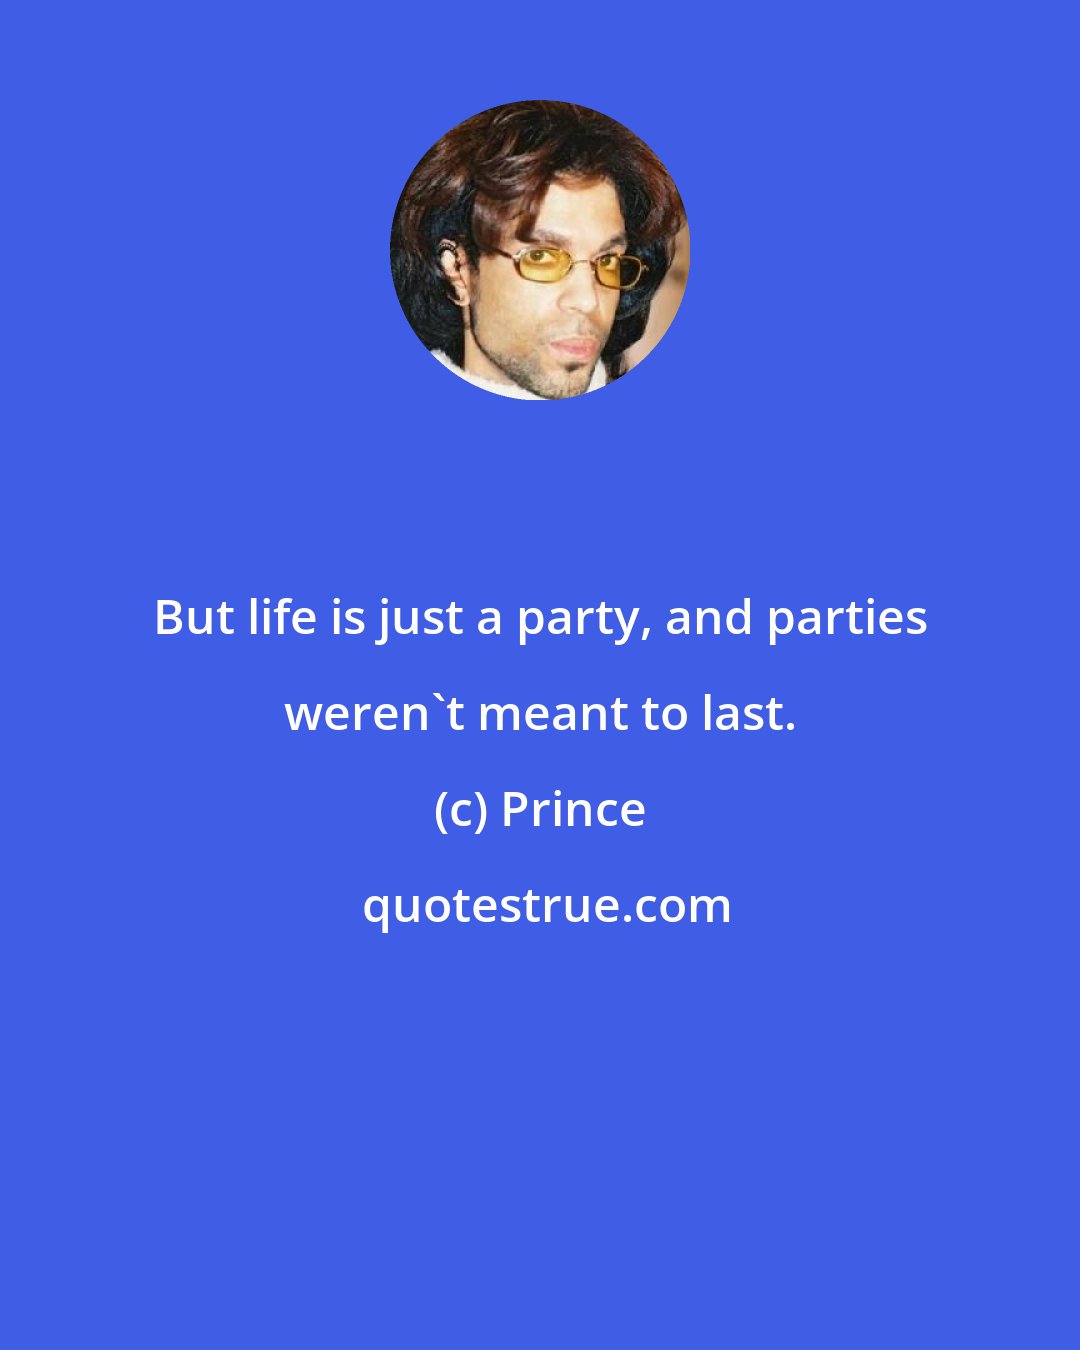 Prince: But life is just a party, and parties weren't meant to last.